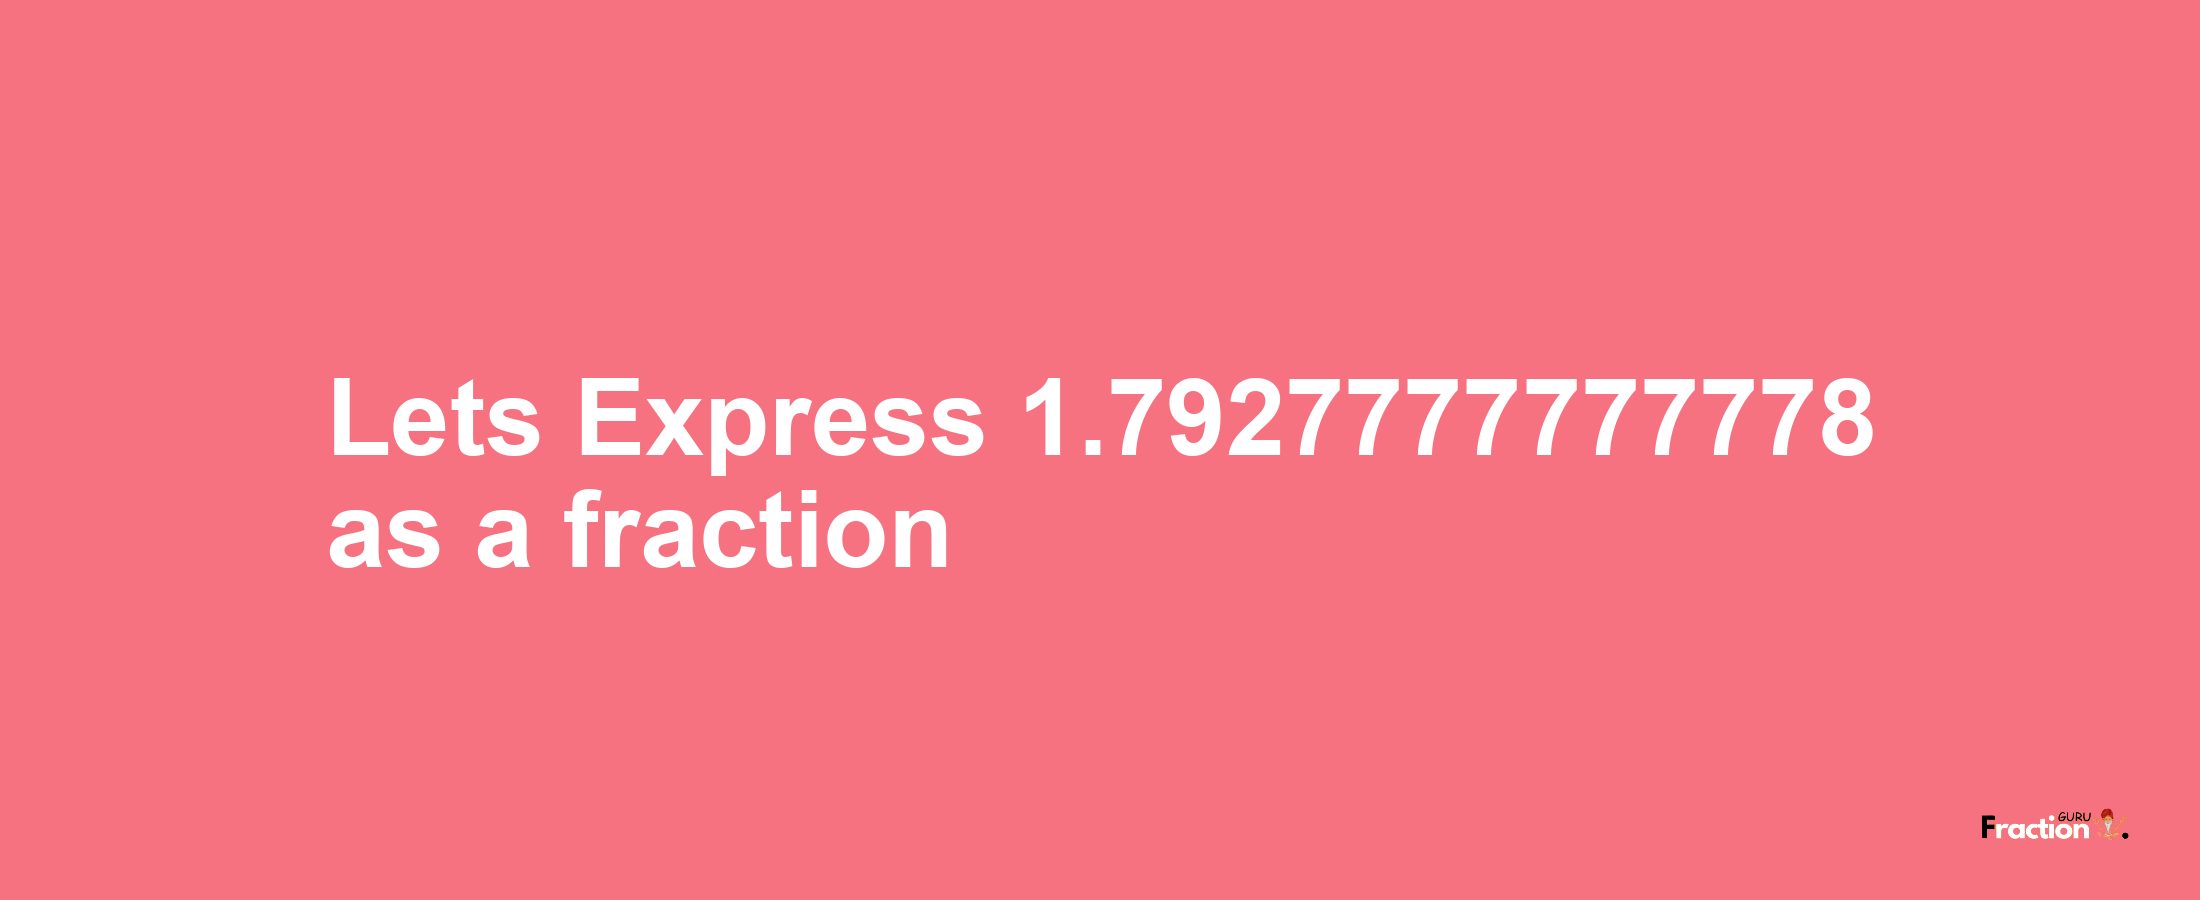 Lets Express 1.7927777777778 as afraction